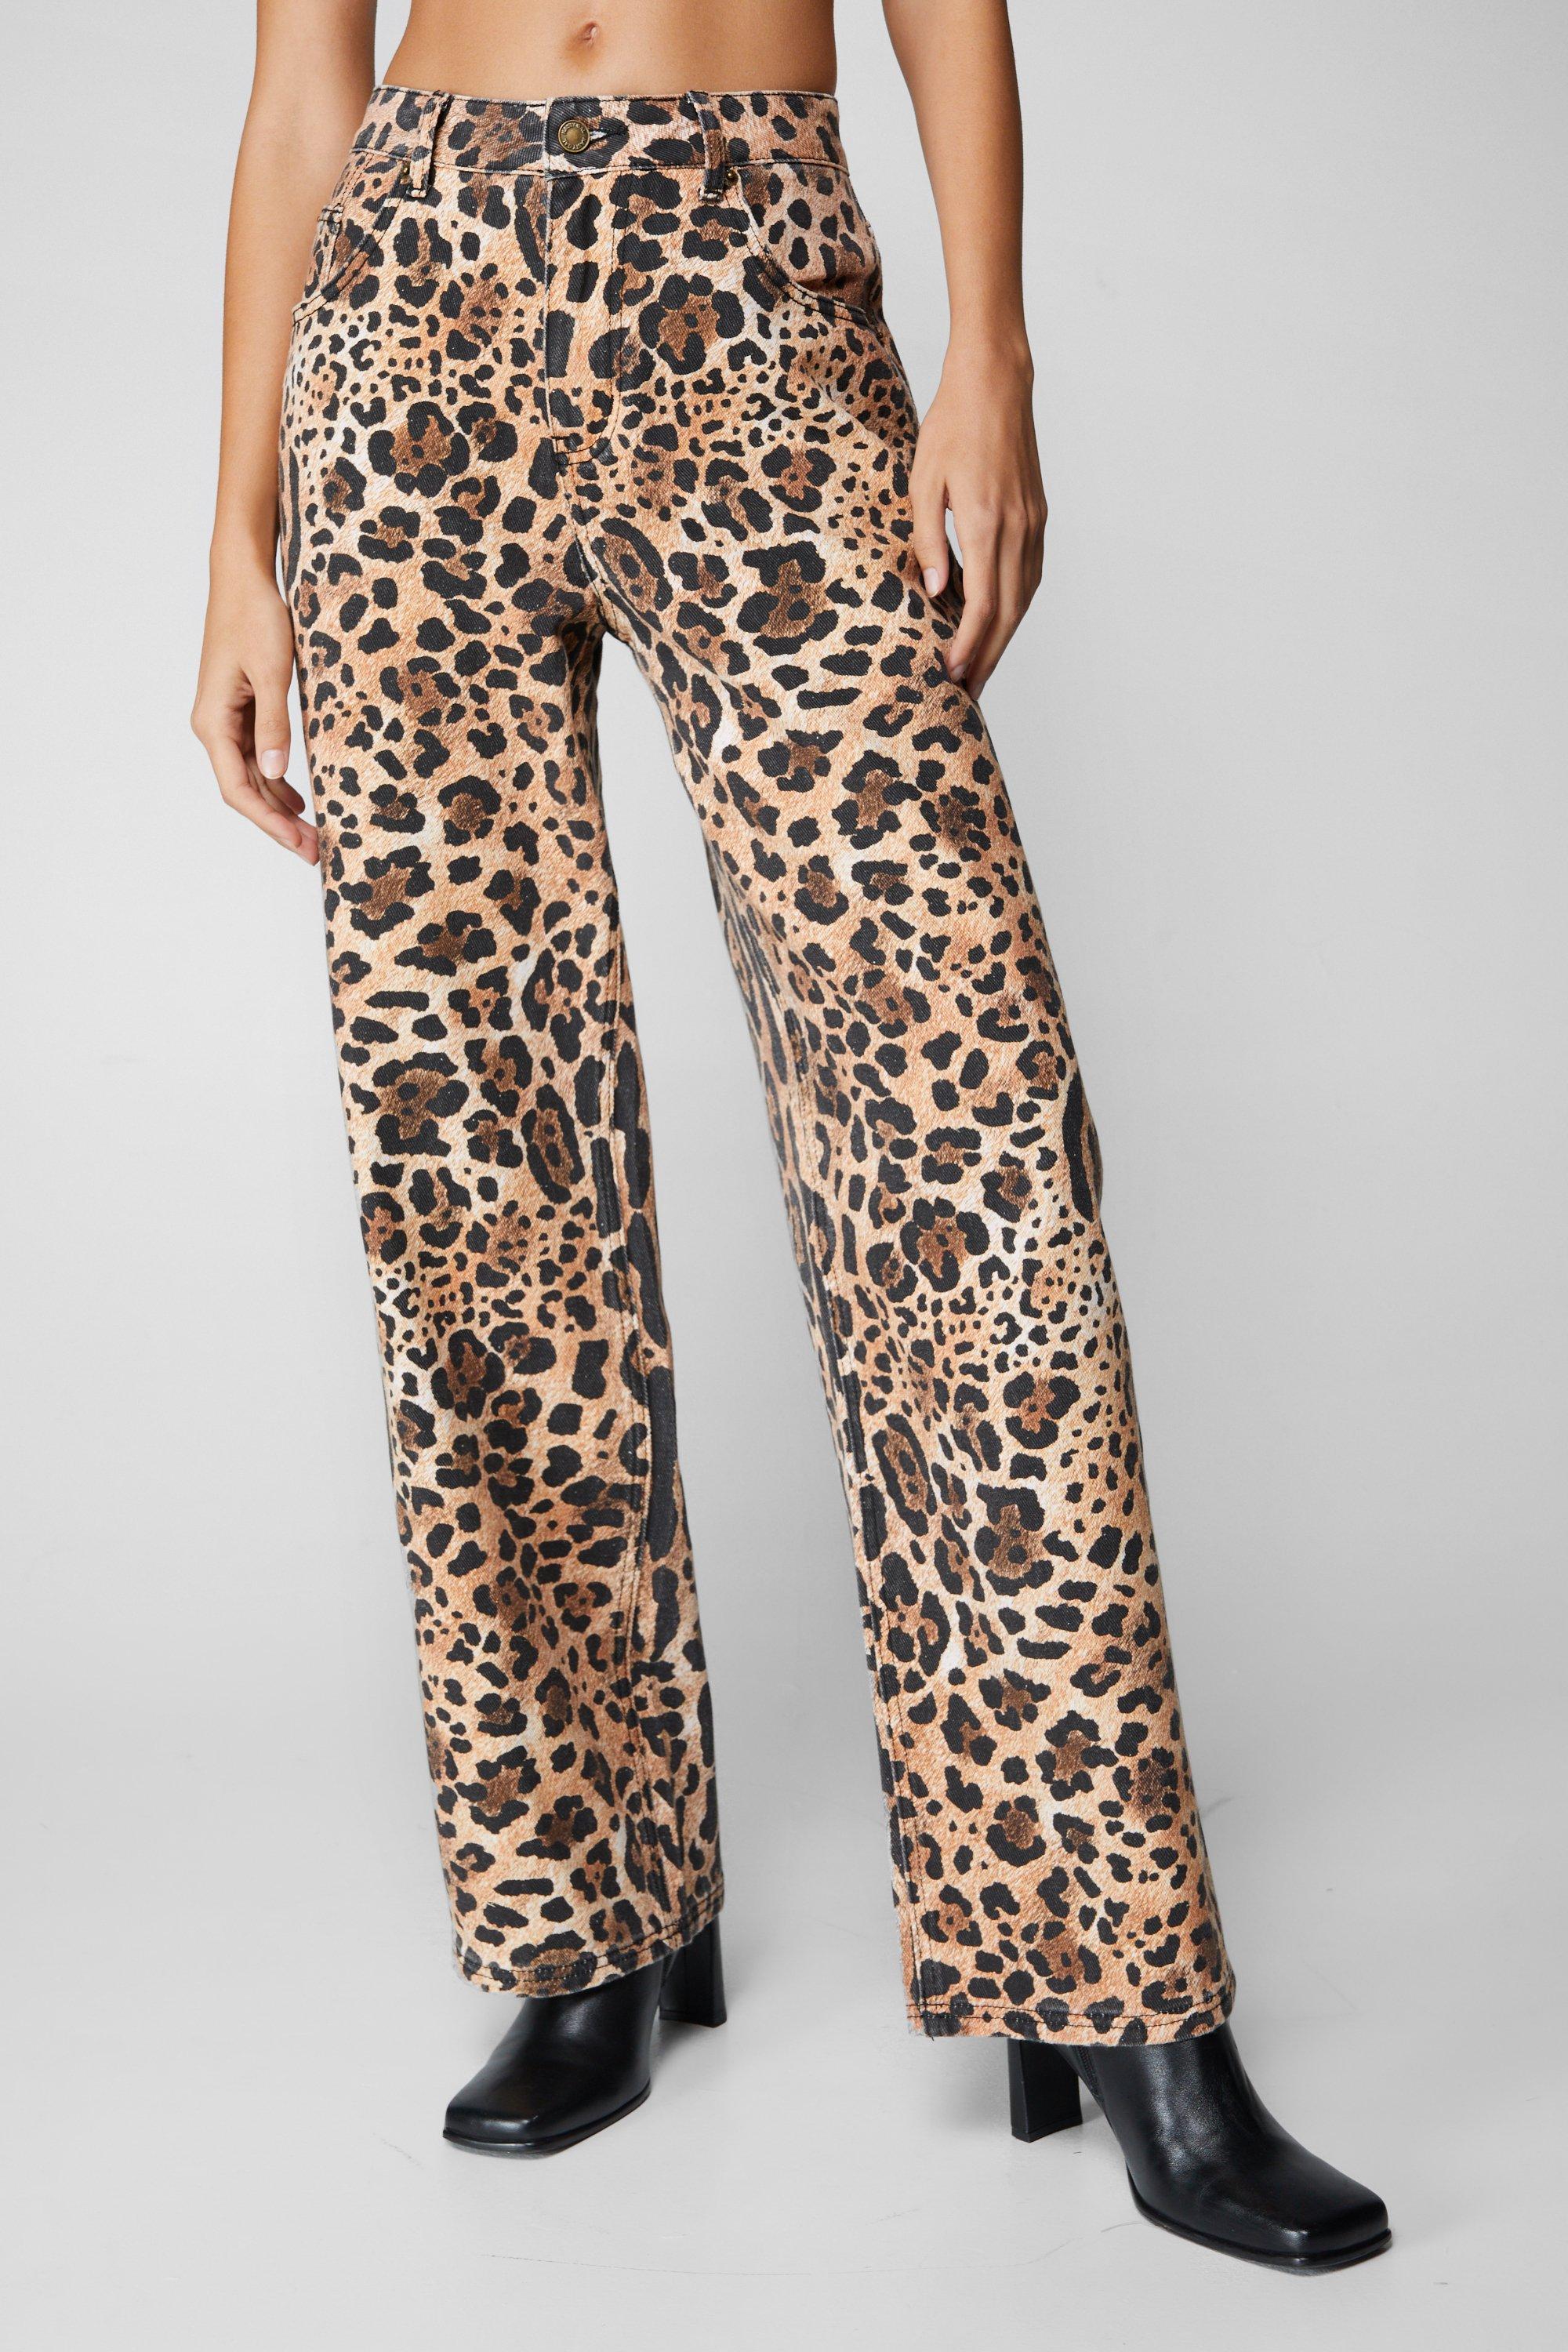 Bold Animal Print Charcoal Gray and White Skinny Jeans - Medium